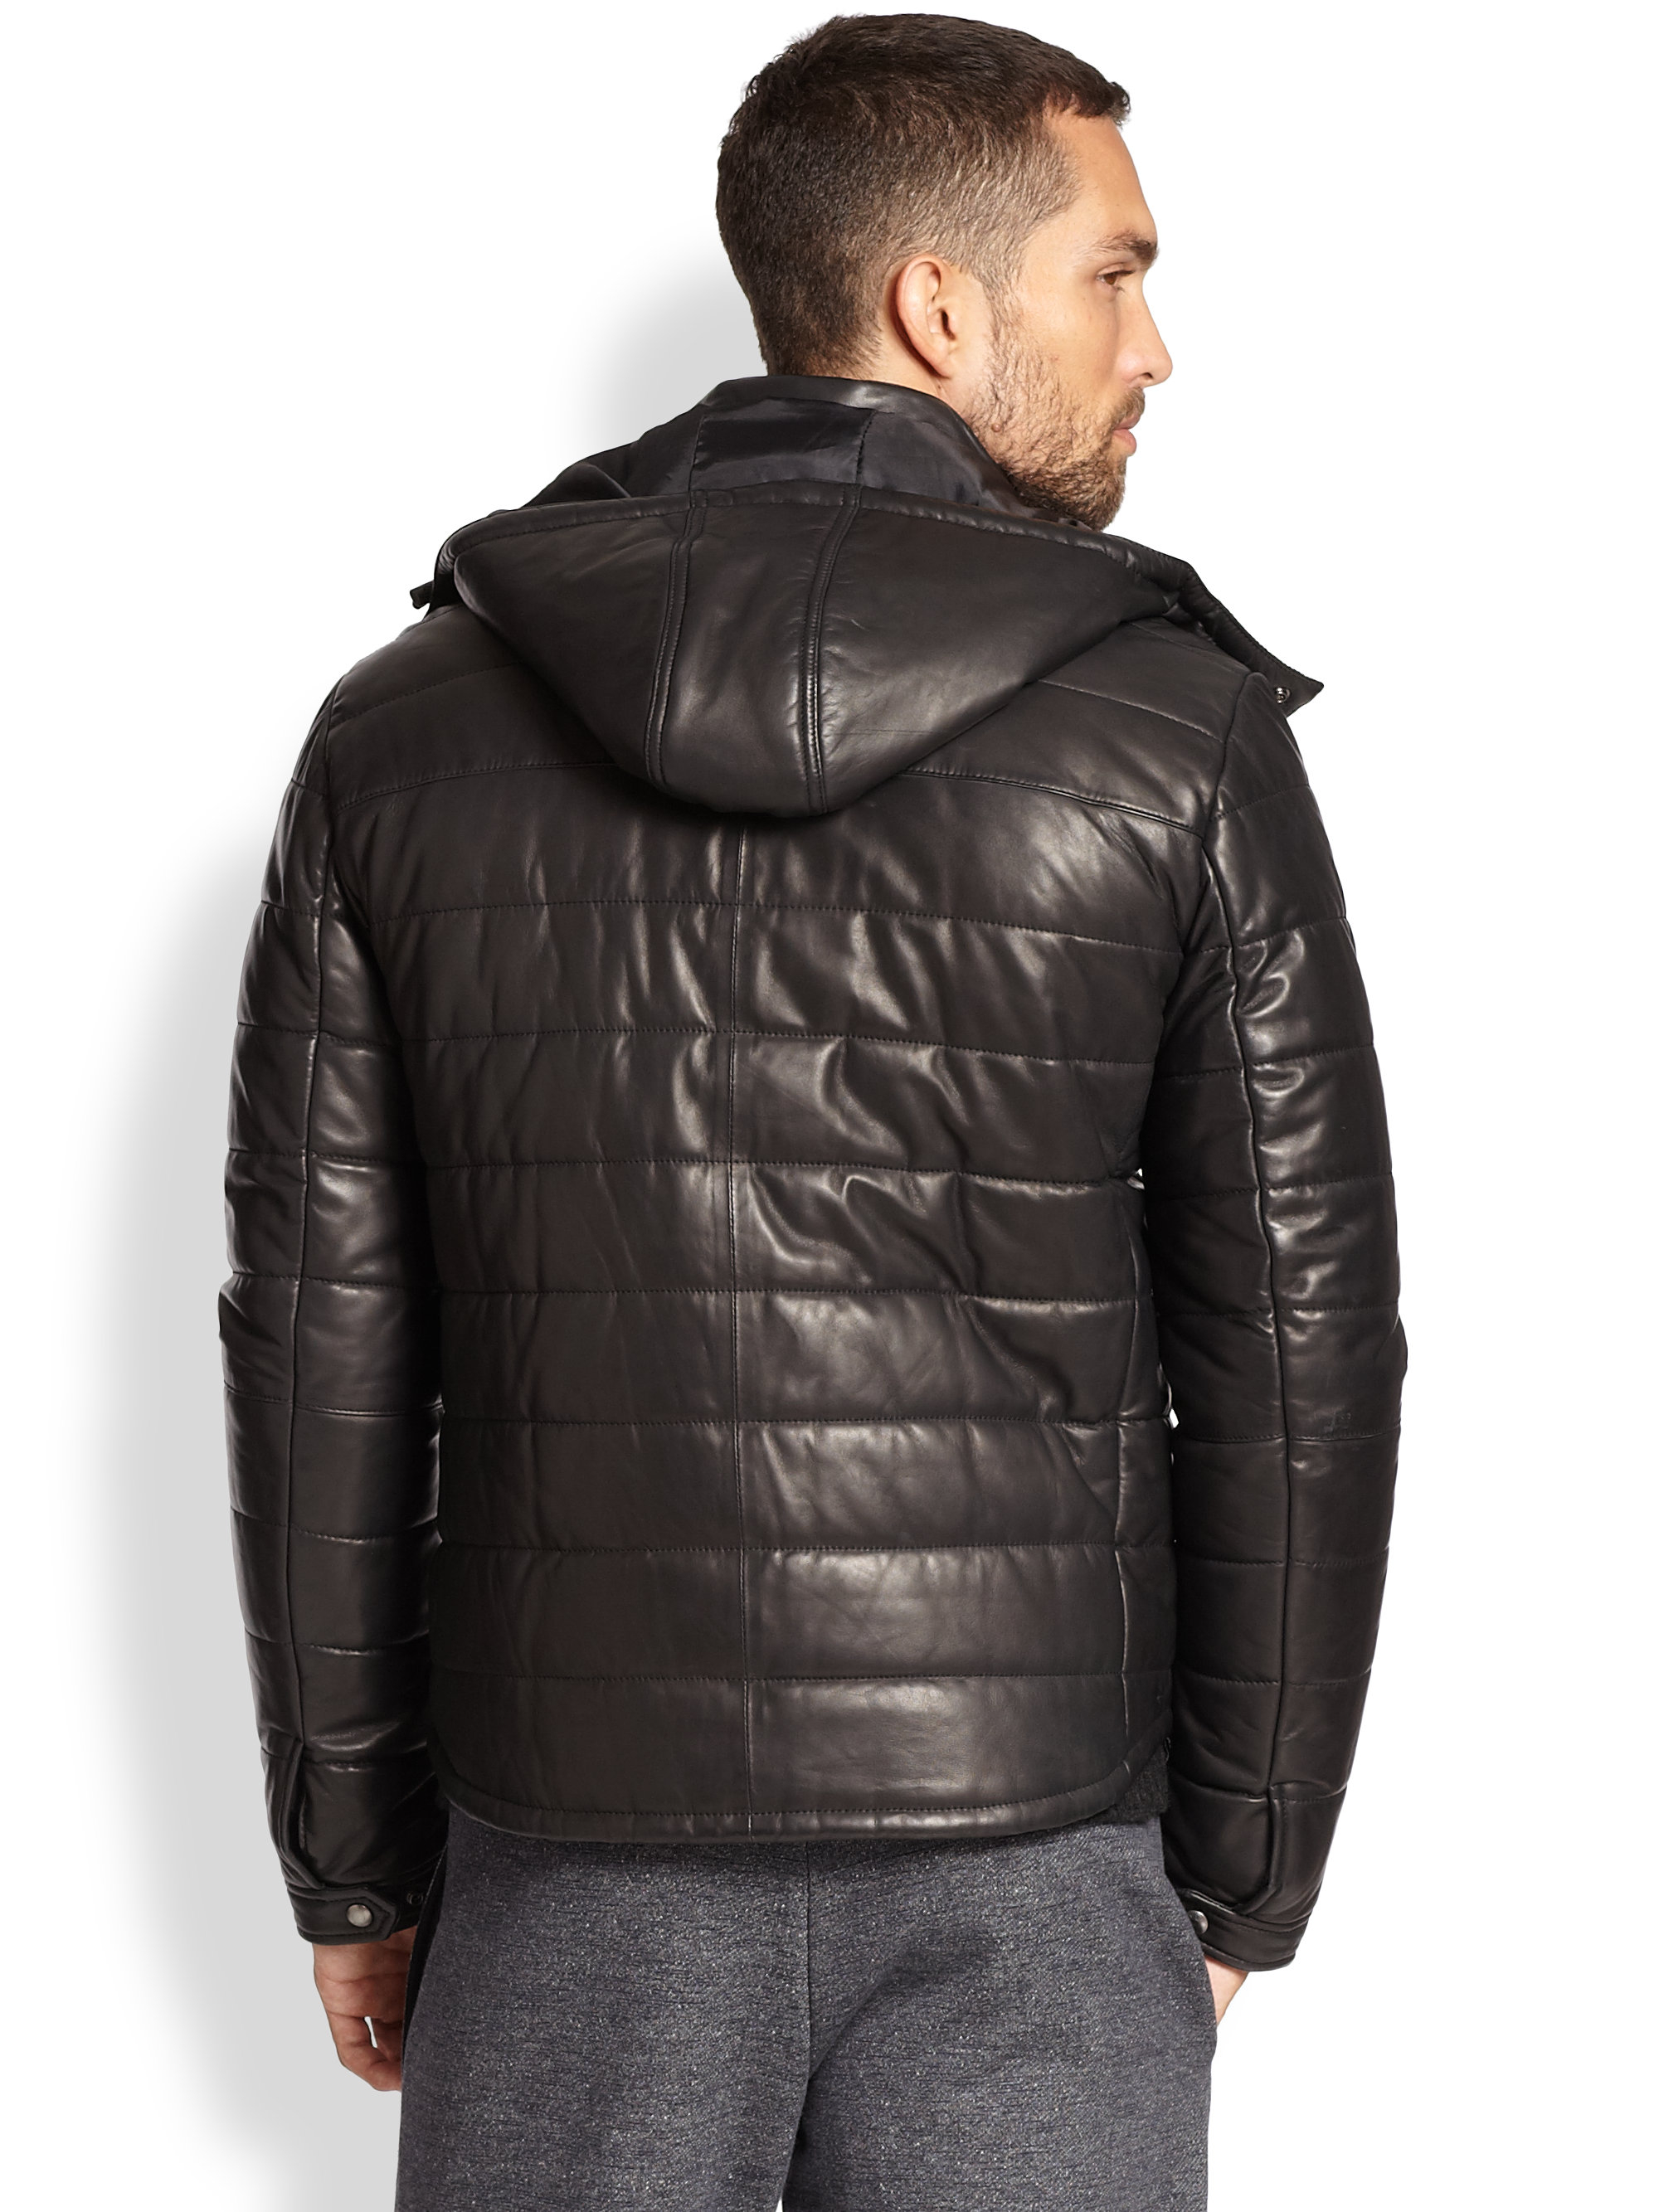 Vince Quilted Leather Puffer Jacket in Black for Men - Lyst